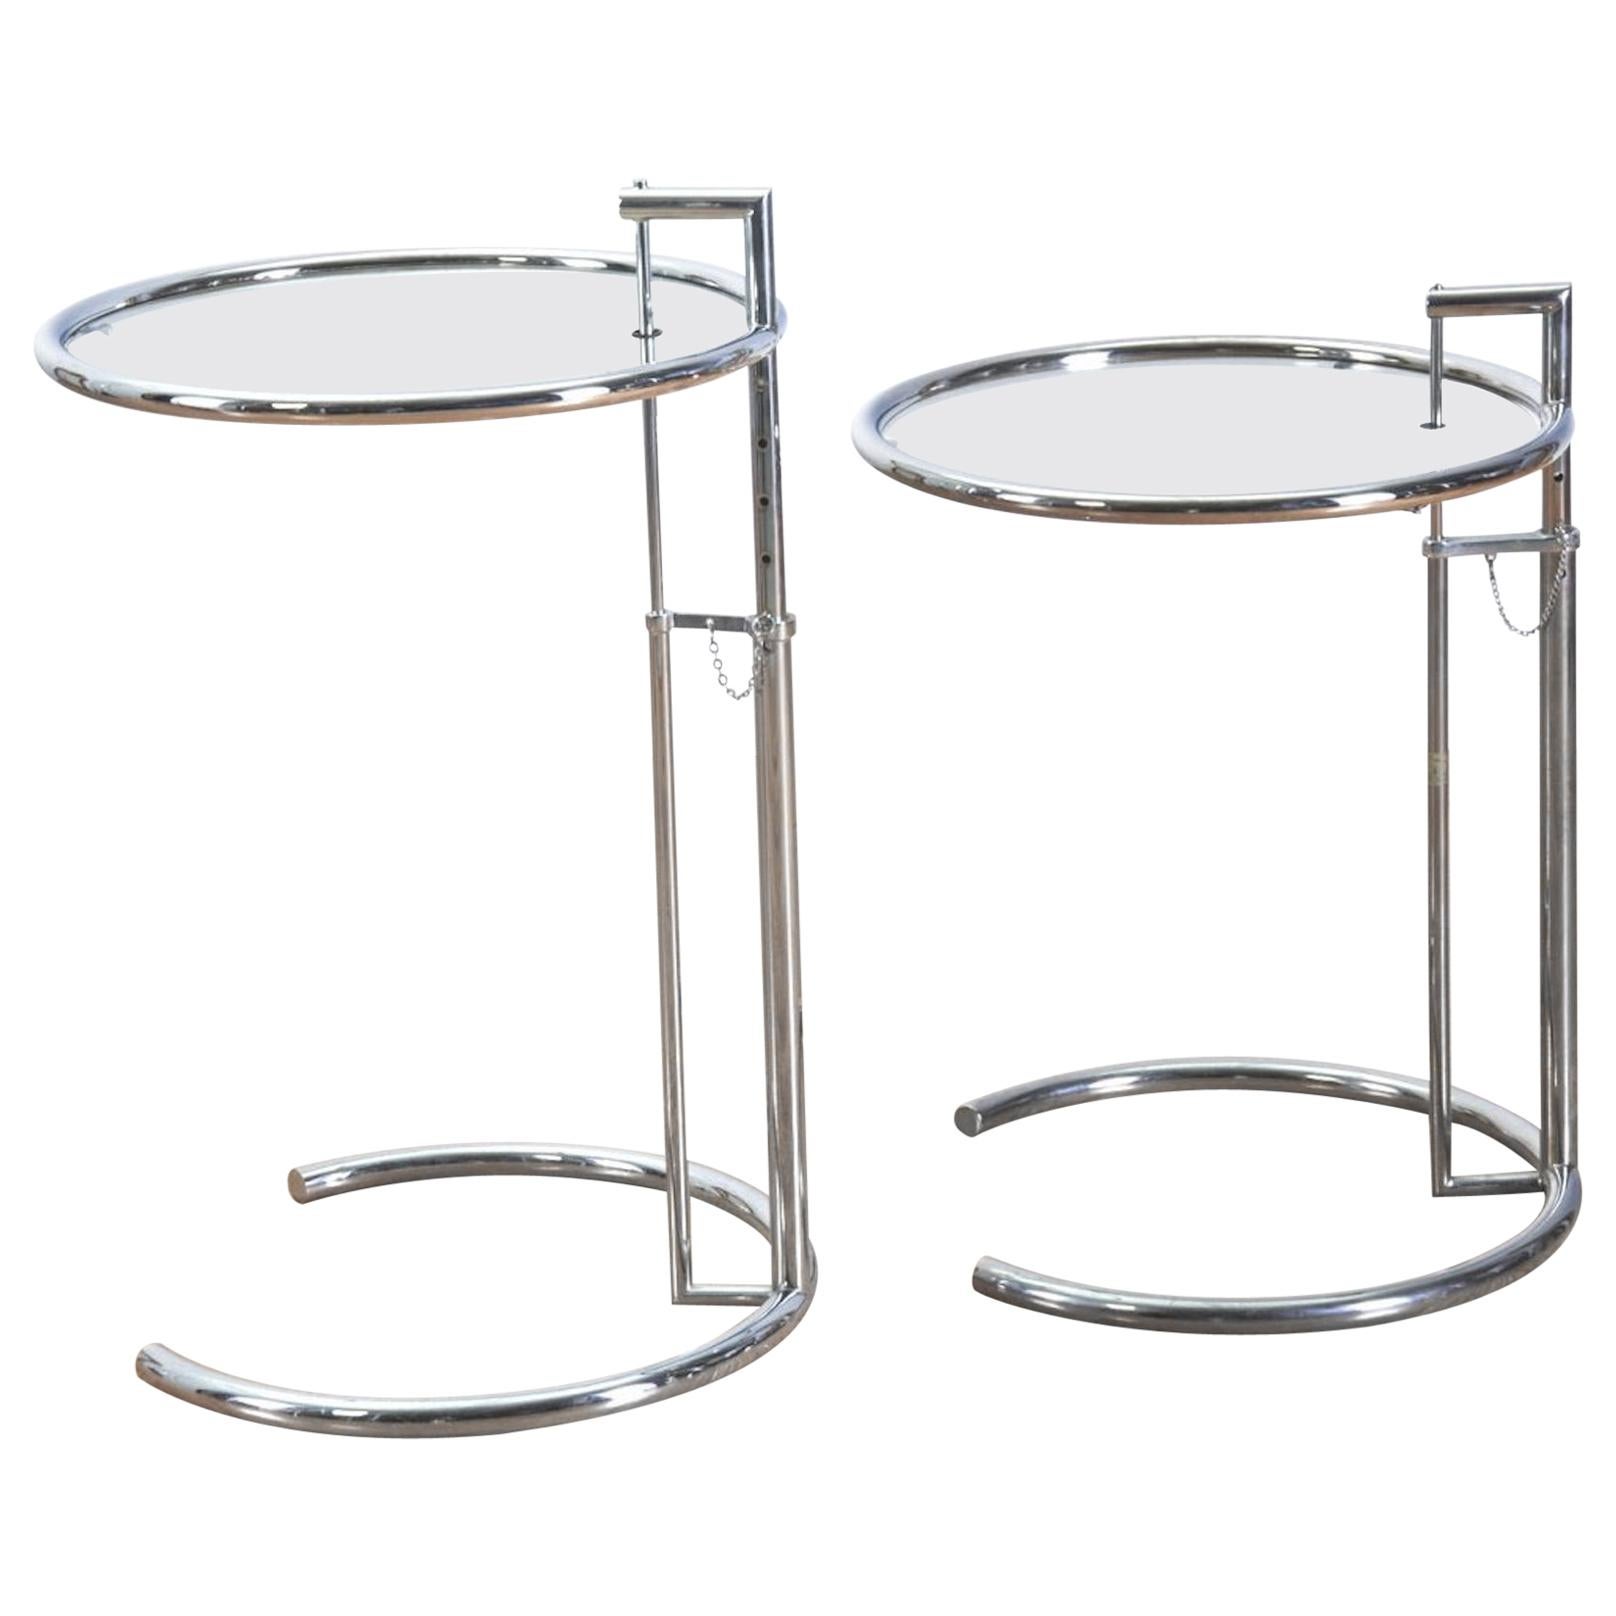 Pair of Chrome and Glass E-1027 Side Tables, In the Style of Eileen Gray